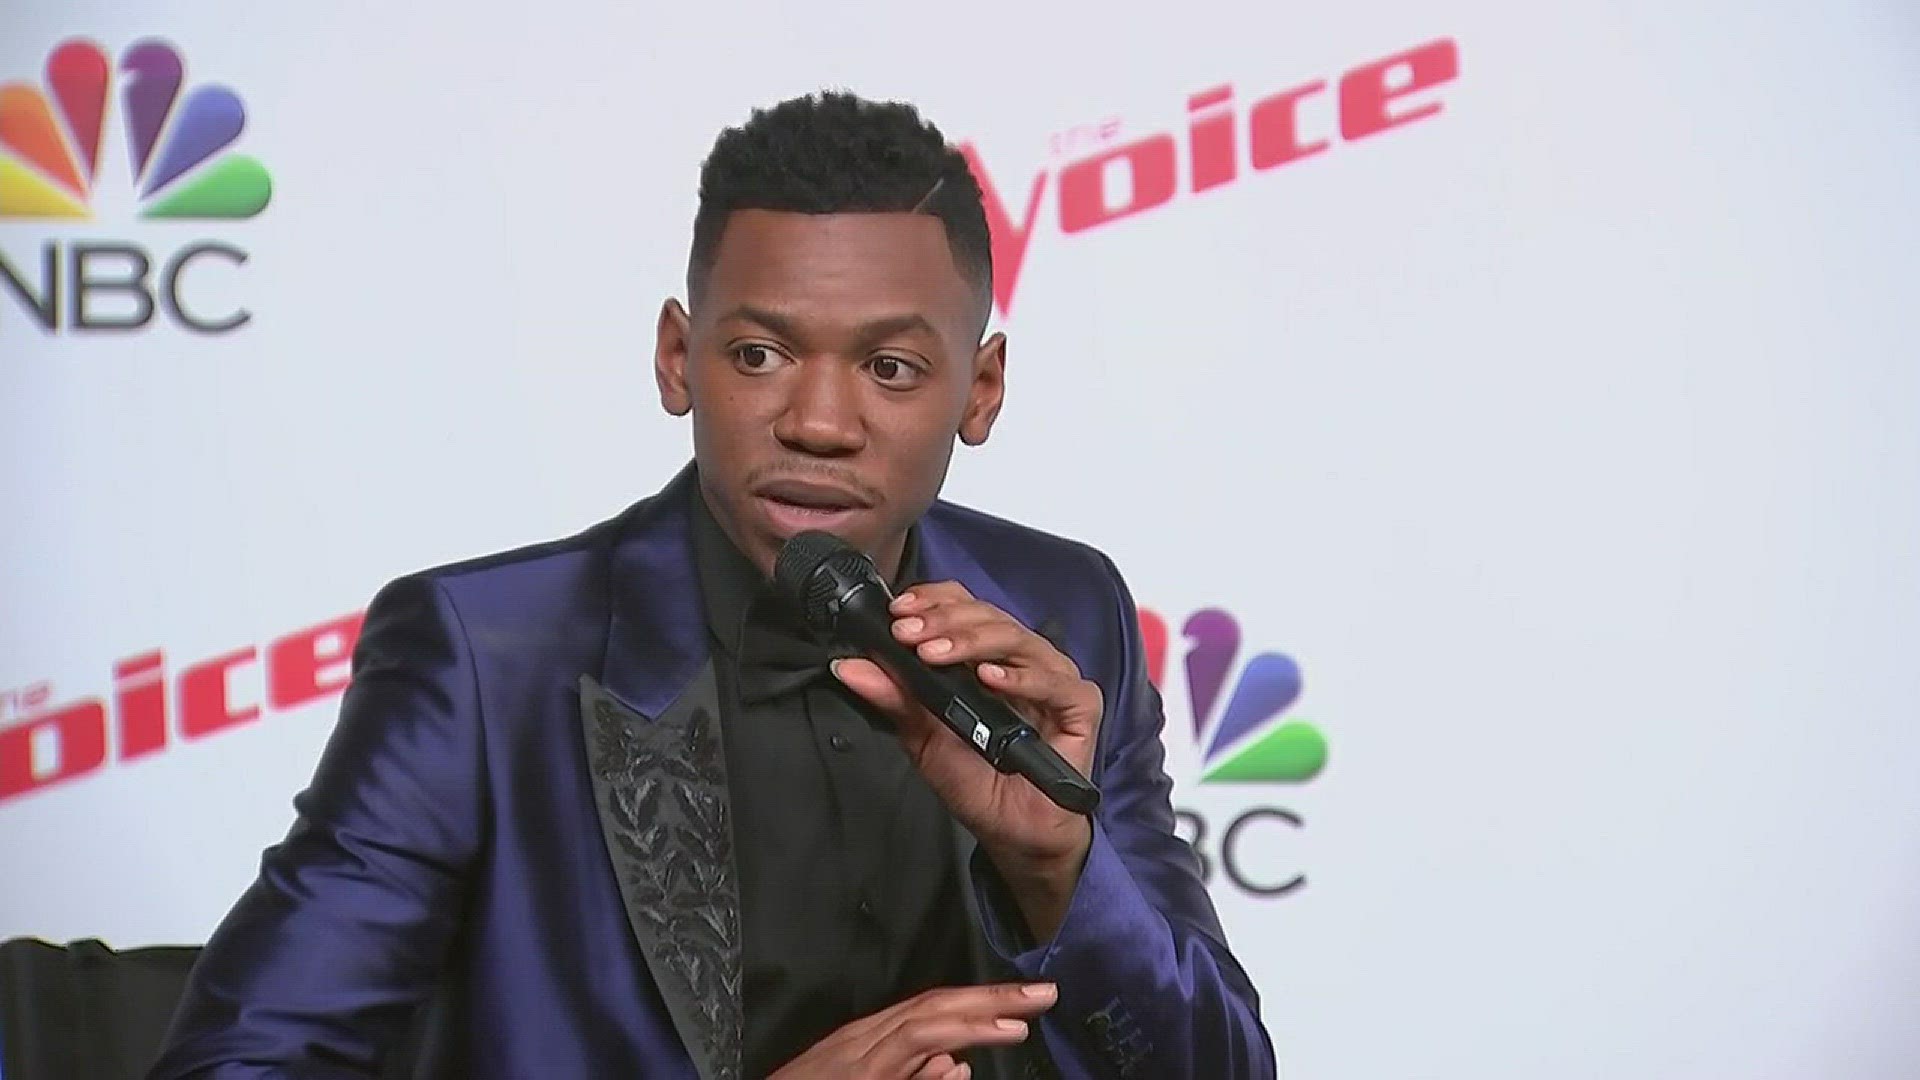 Listen to a snippet of a press gathering featuring Chris Blue and Alicia Keys after "The Voice". May 23, 2017